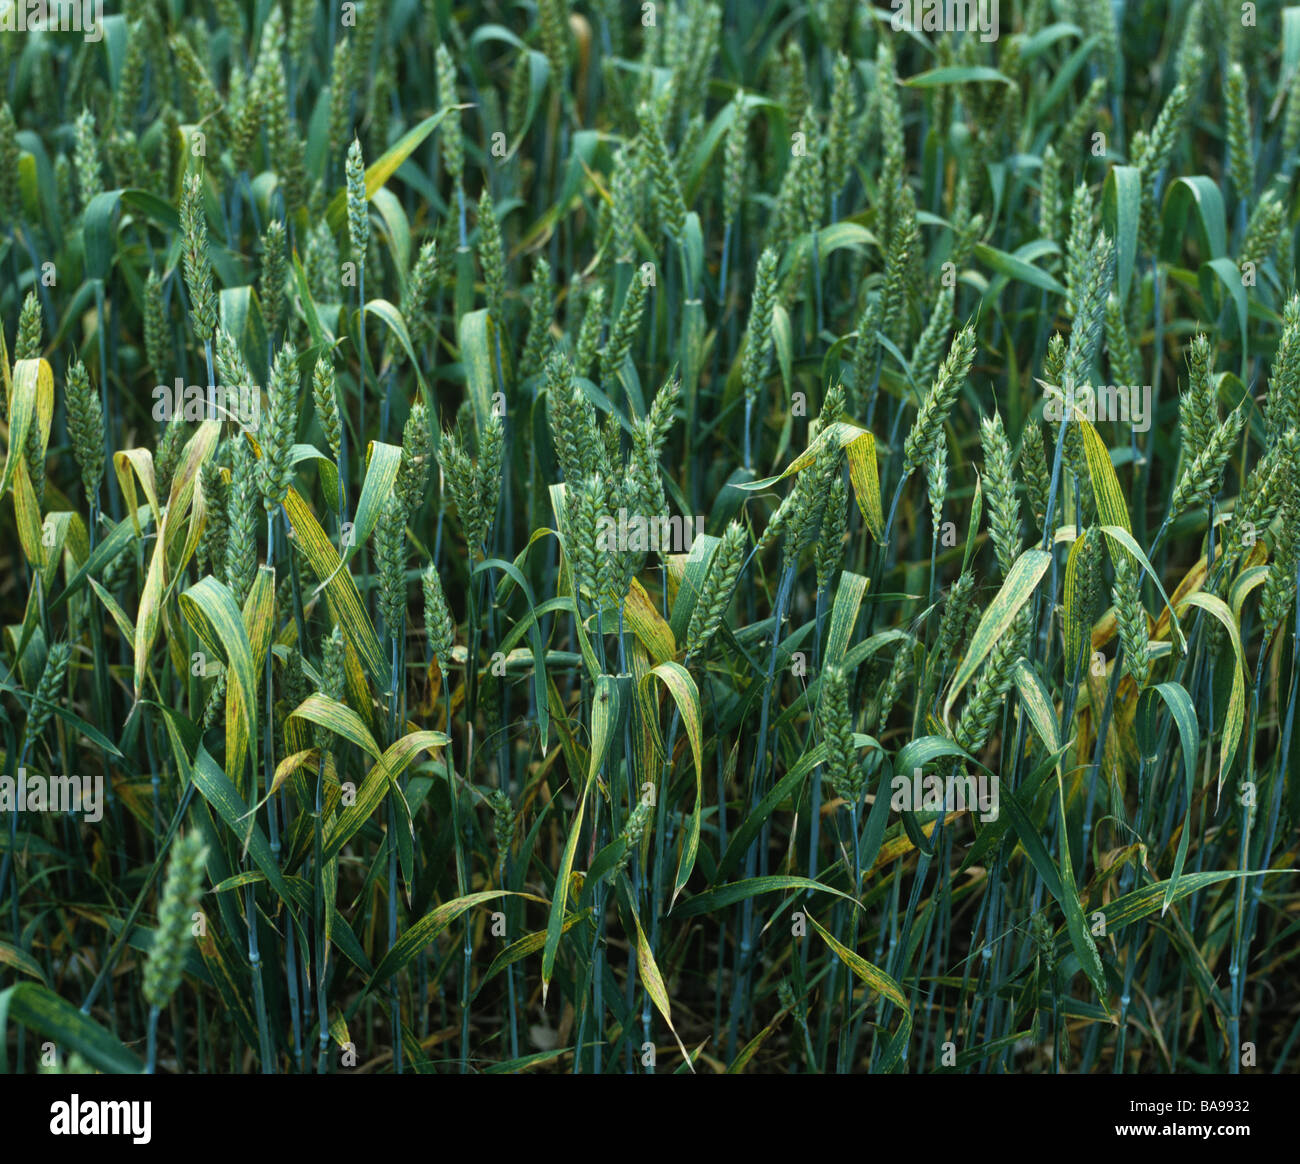 Symptoms of magnesium deficiency of the flagleaves of a wheat crop in ...